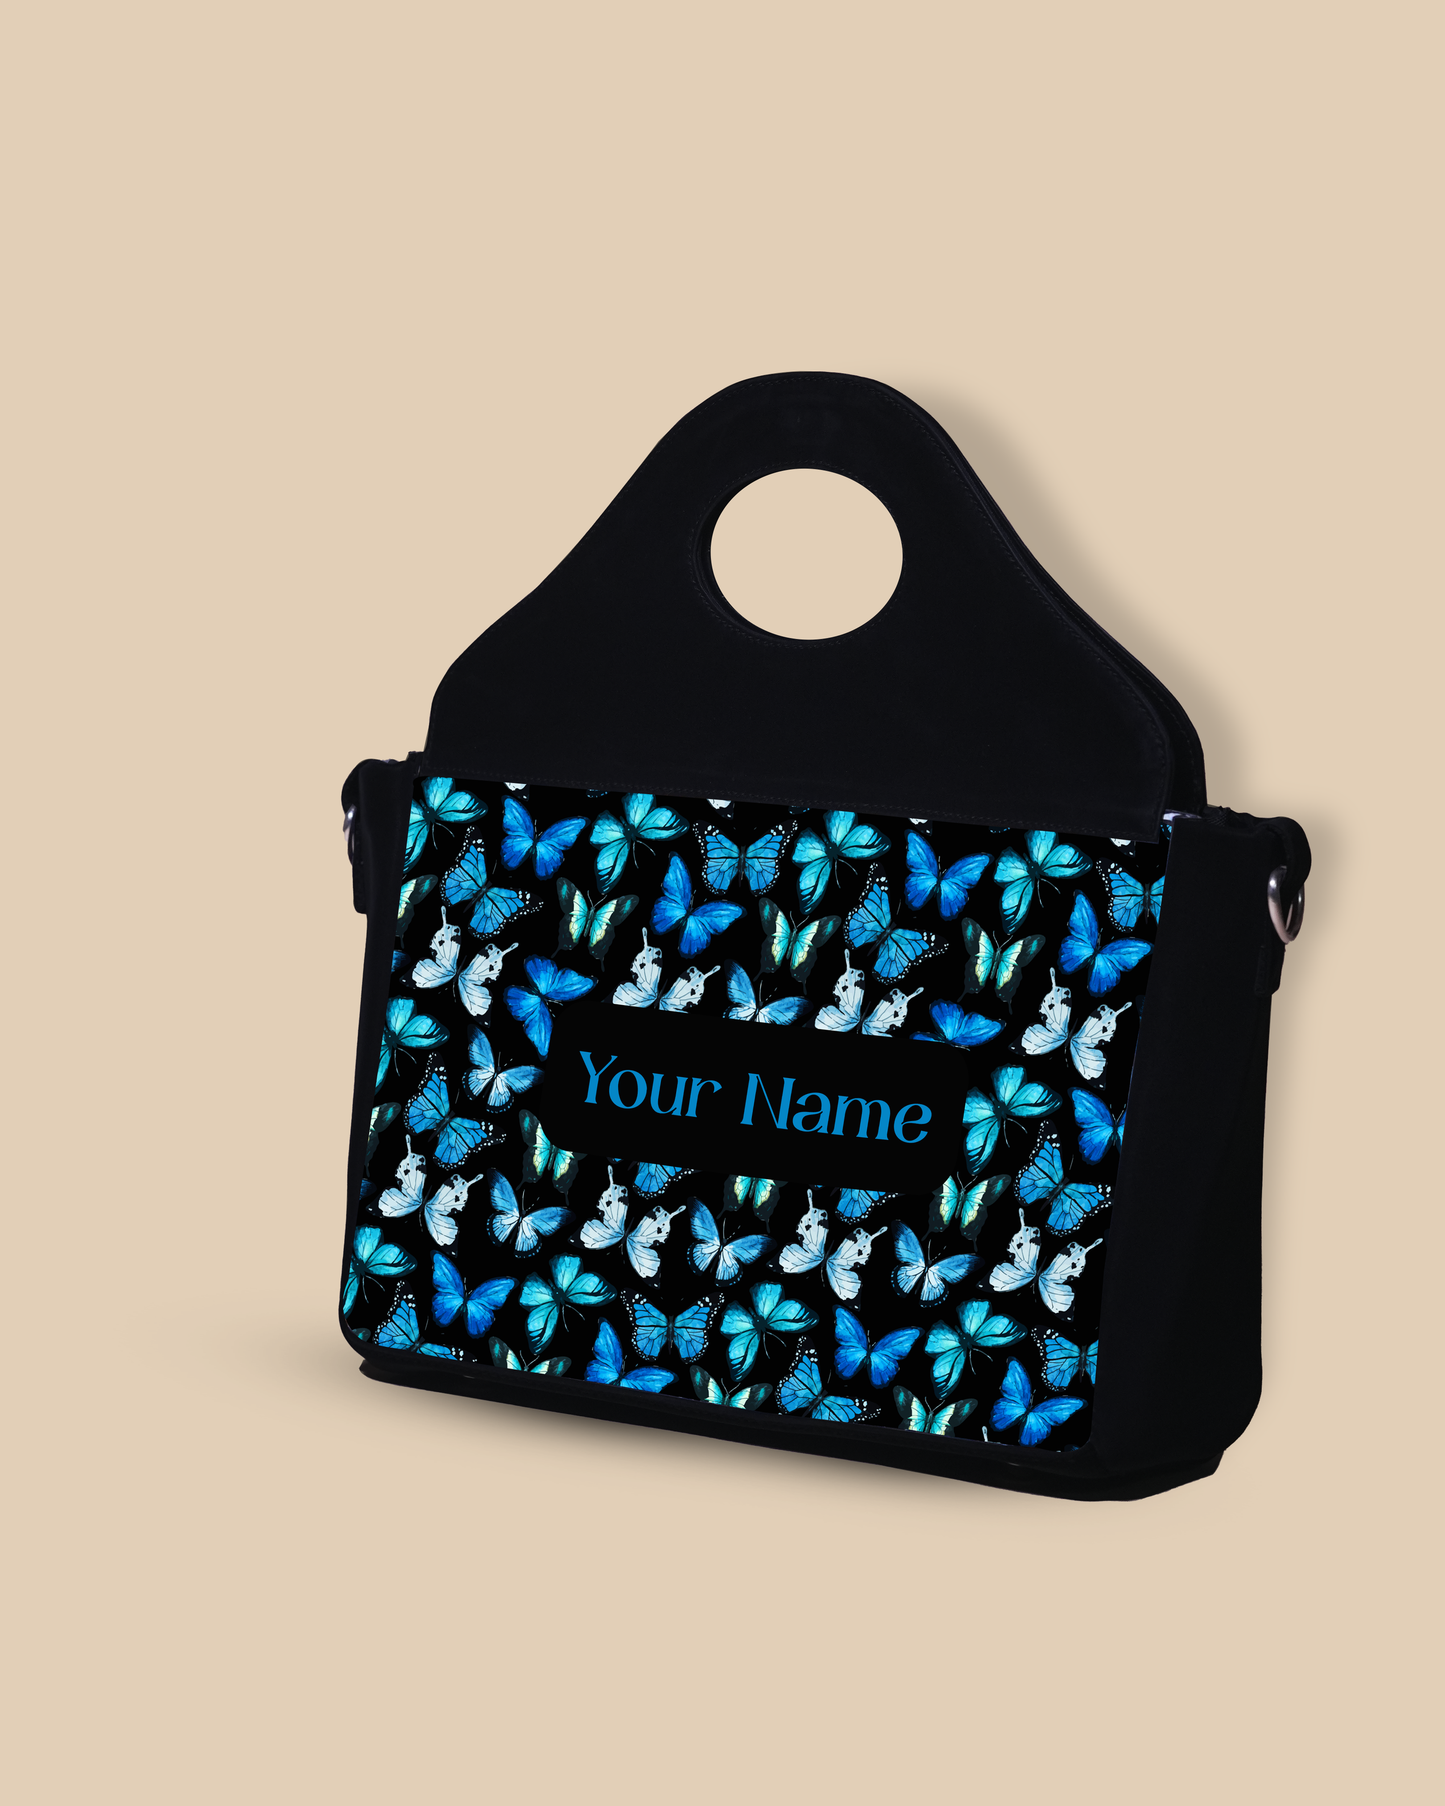 Customized Sling Purse Designed With Blue Flying Butterflies